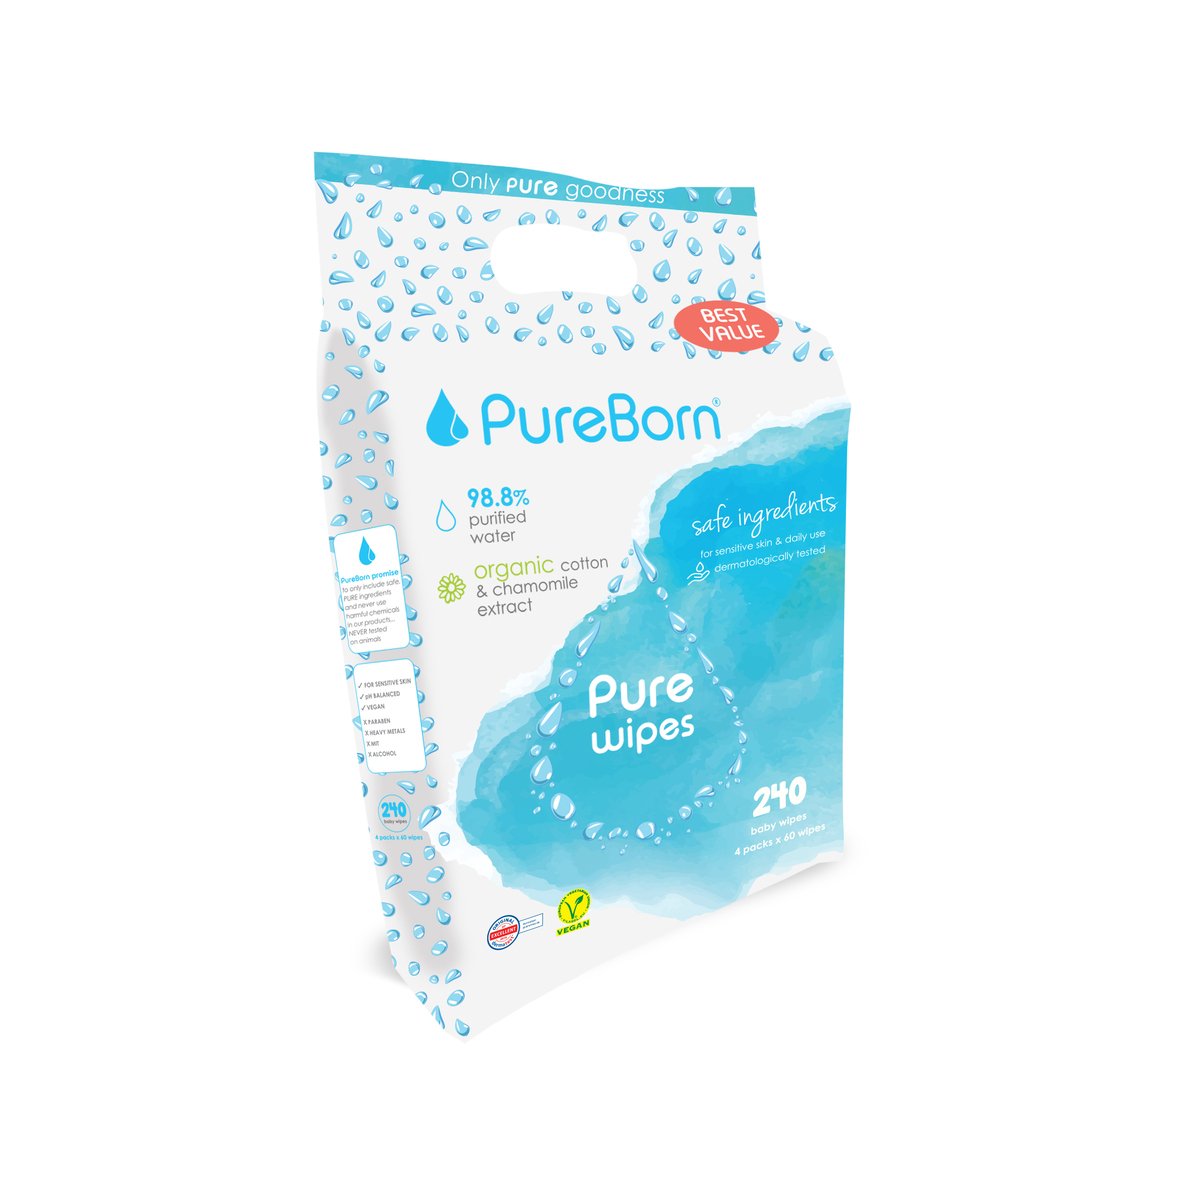 Pure Born Pure Wipes Value Pack 4 x 60 Sheets